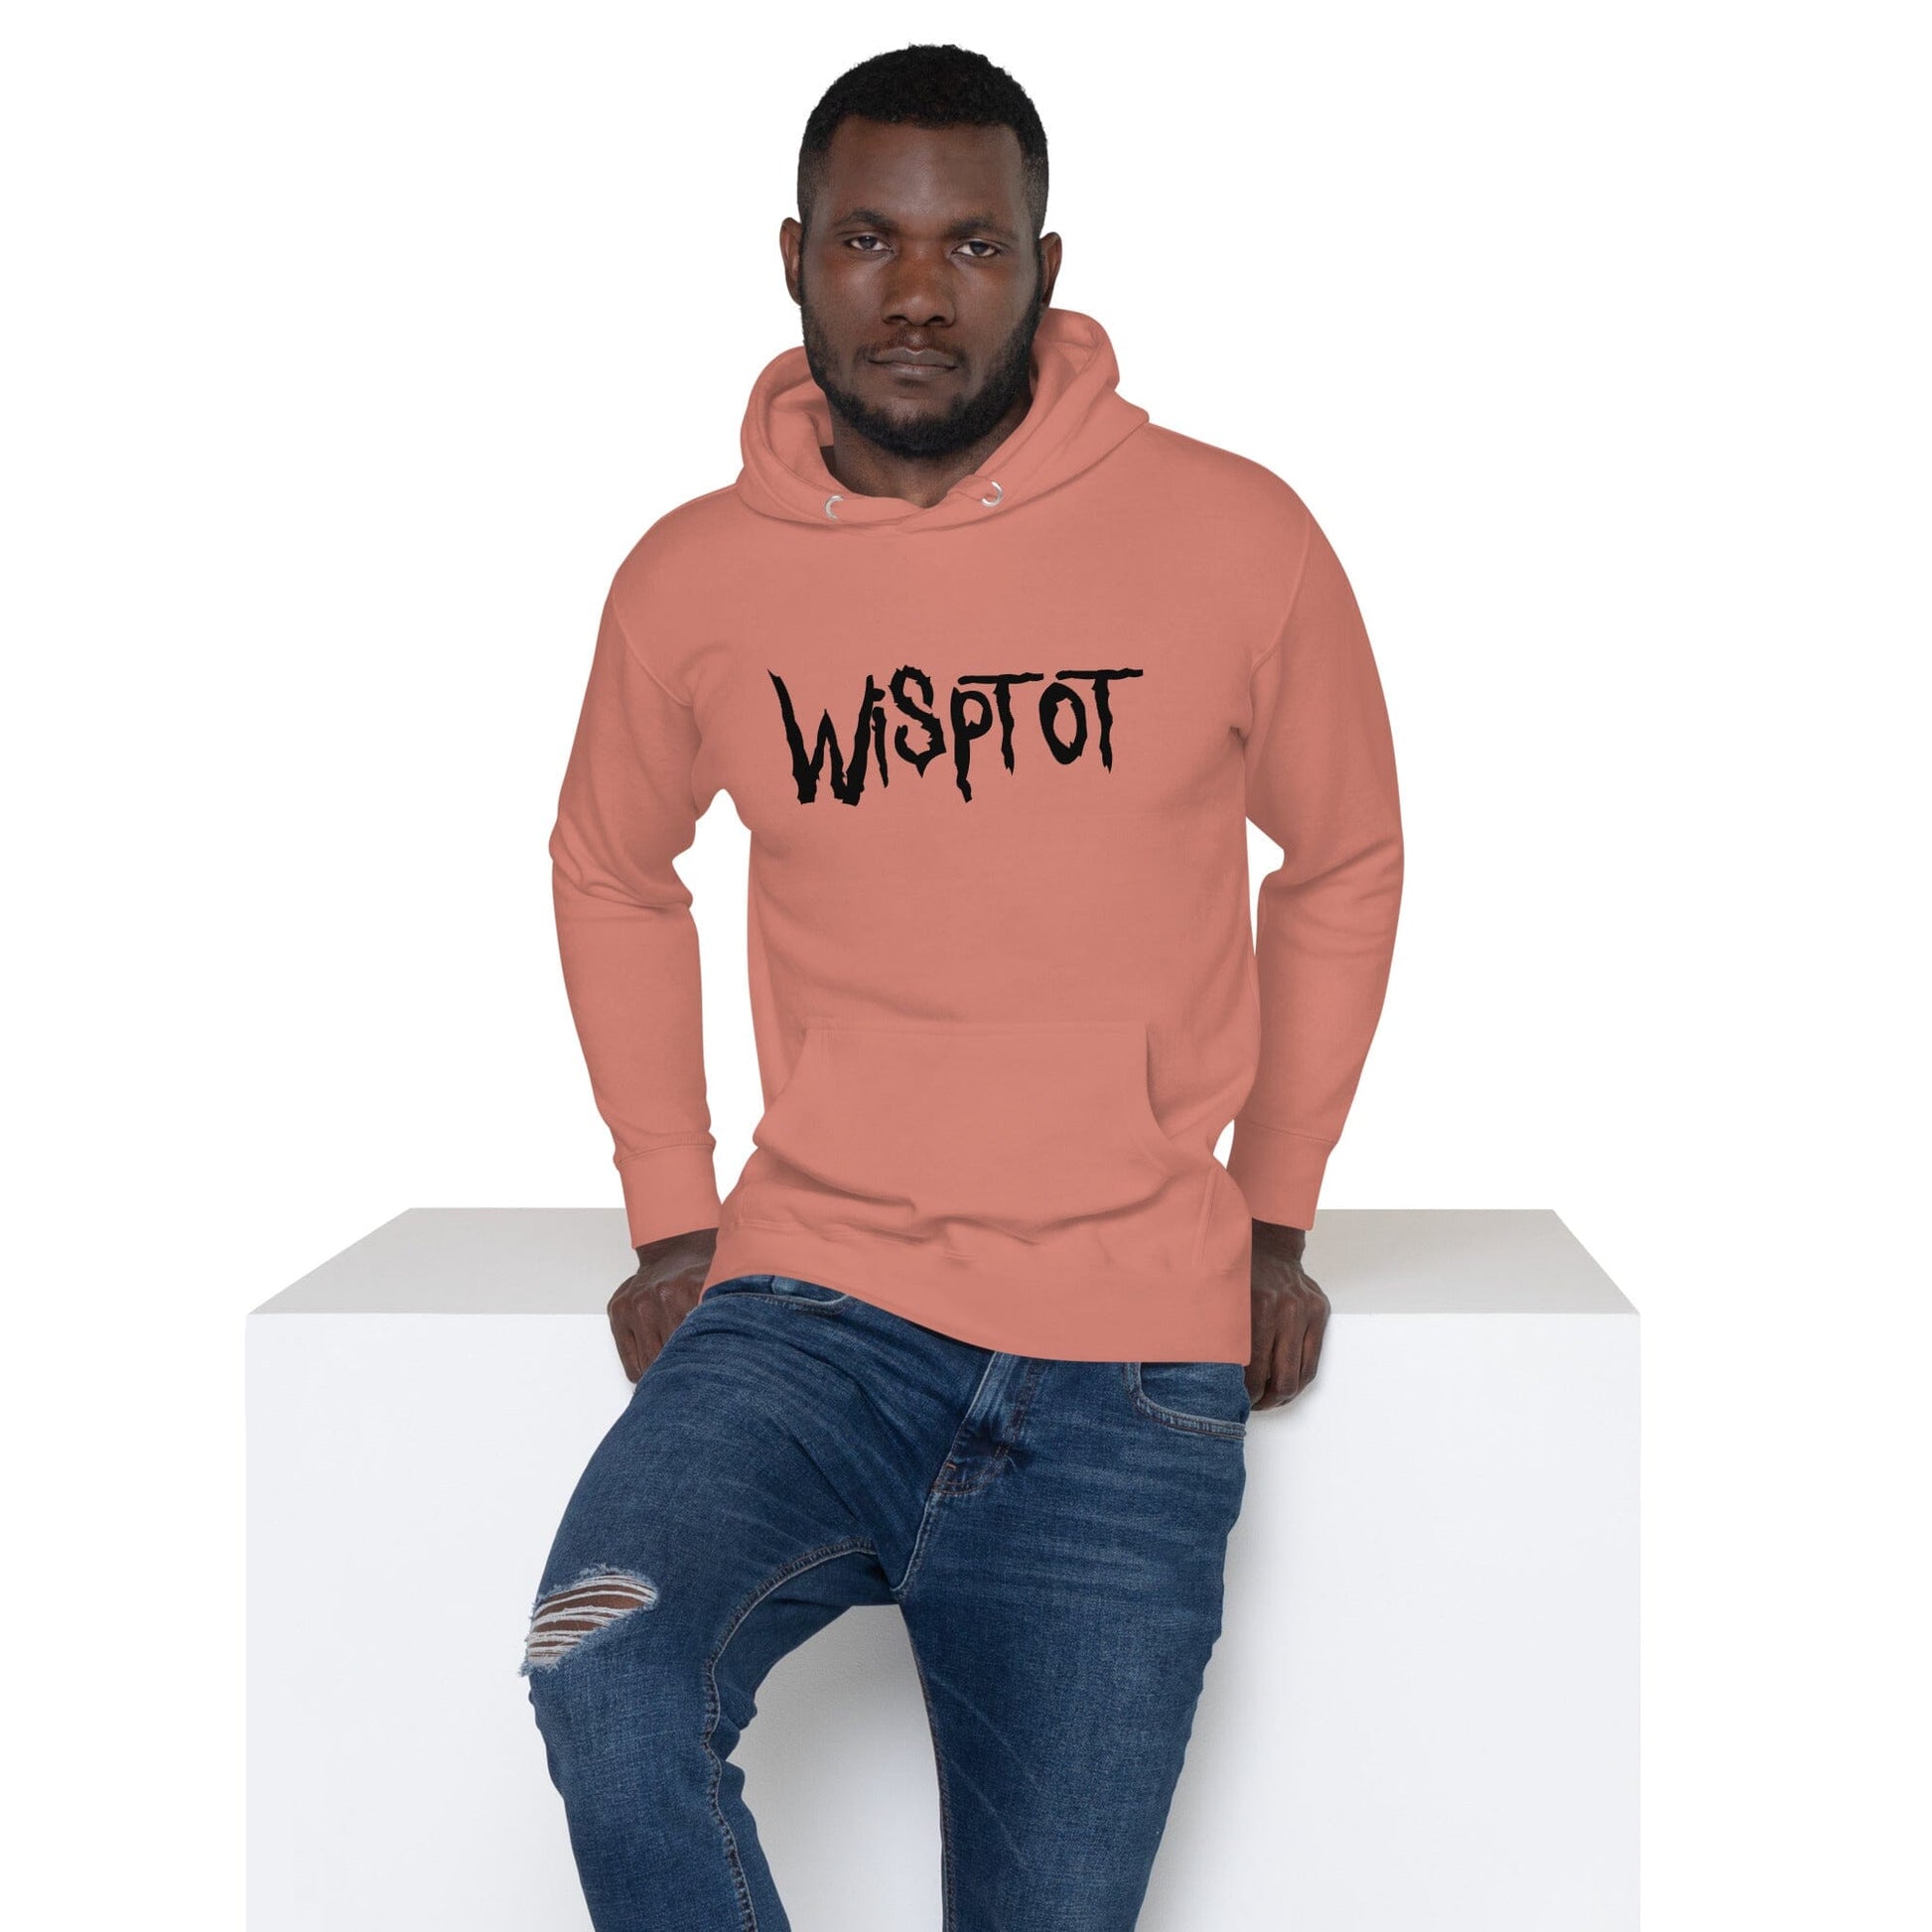 WispTot Hoodie [Unfoiled] (All net proceeds go to equally to Kitty CrusAIDe and Rags to Riches Animal Rescue) JoyousJoyfulJoyness Dusty Rose S 